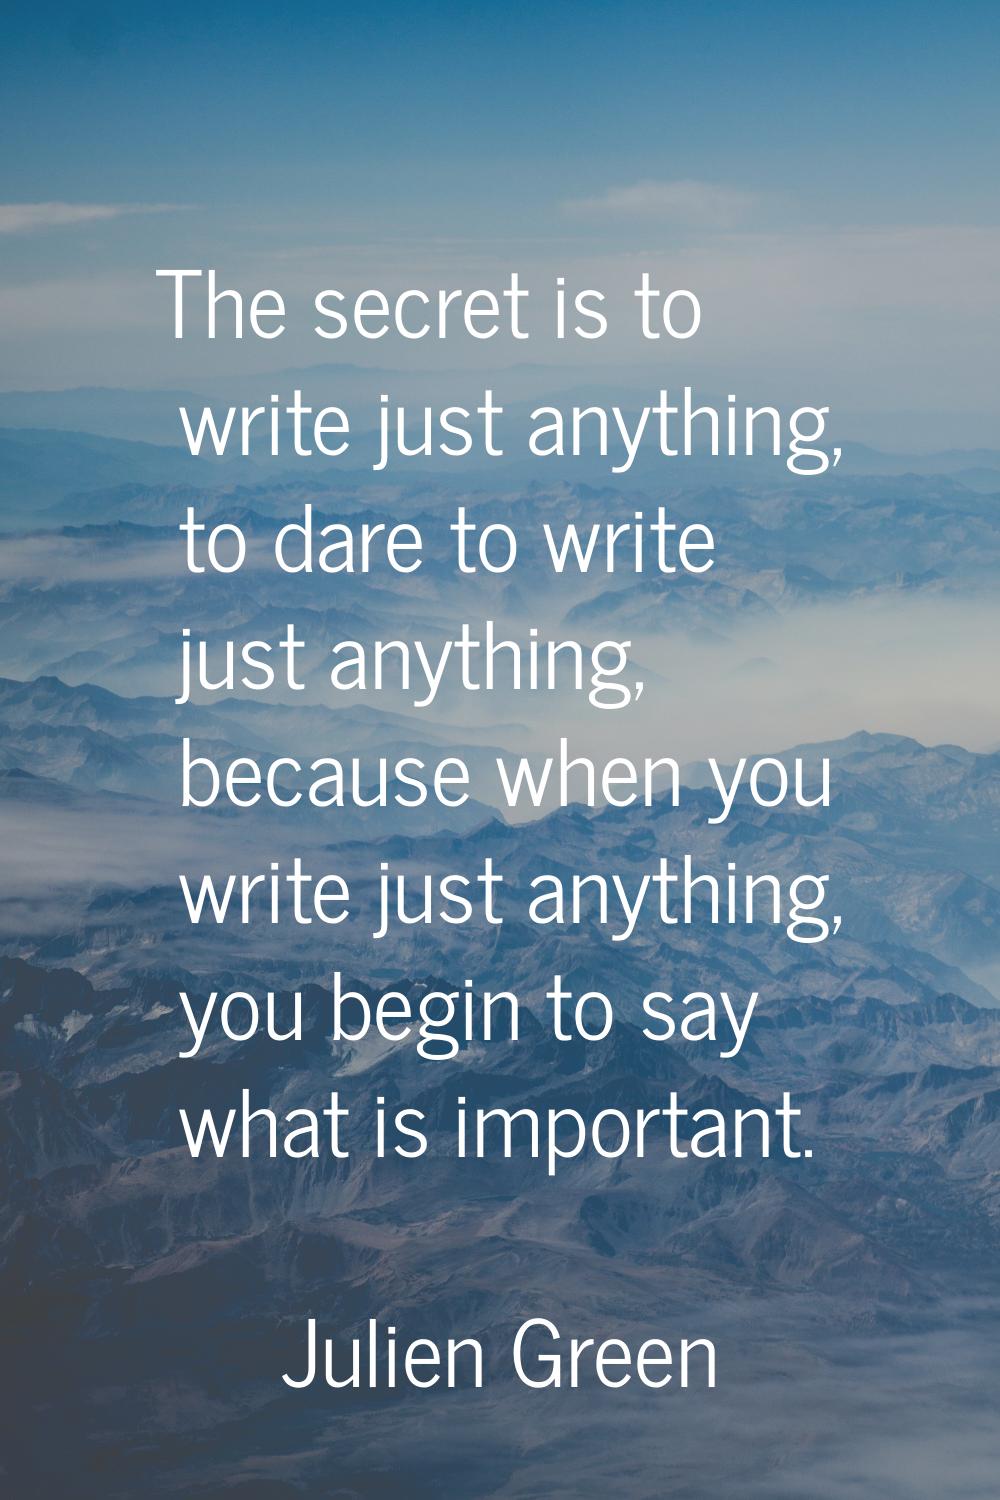 The secret is to write just anything, to dare to write just anything, because when you write just a